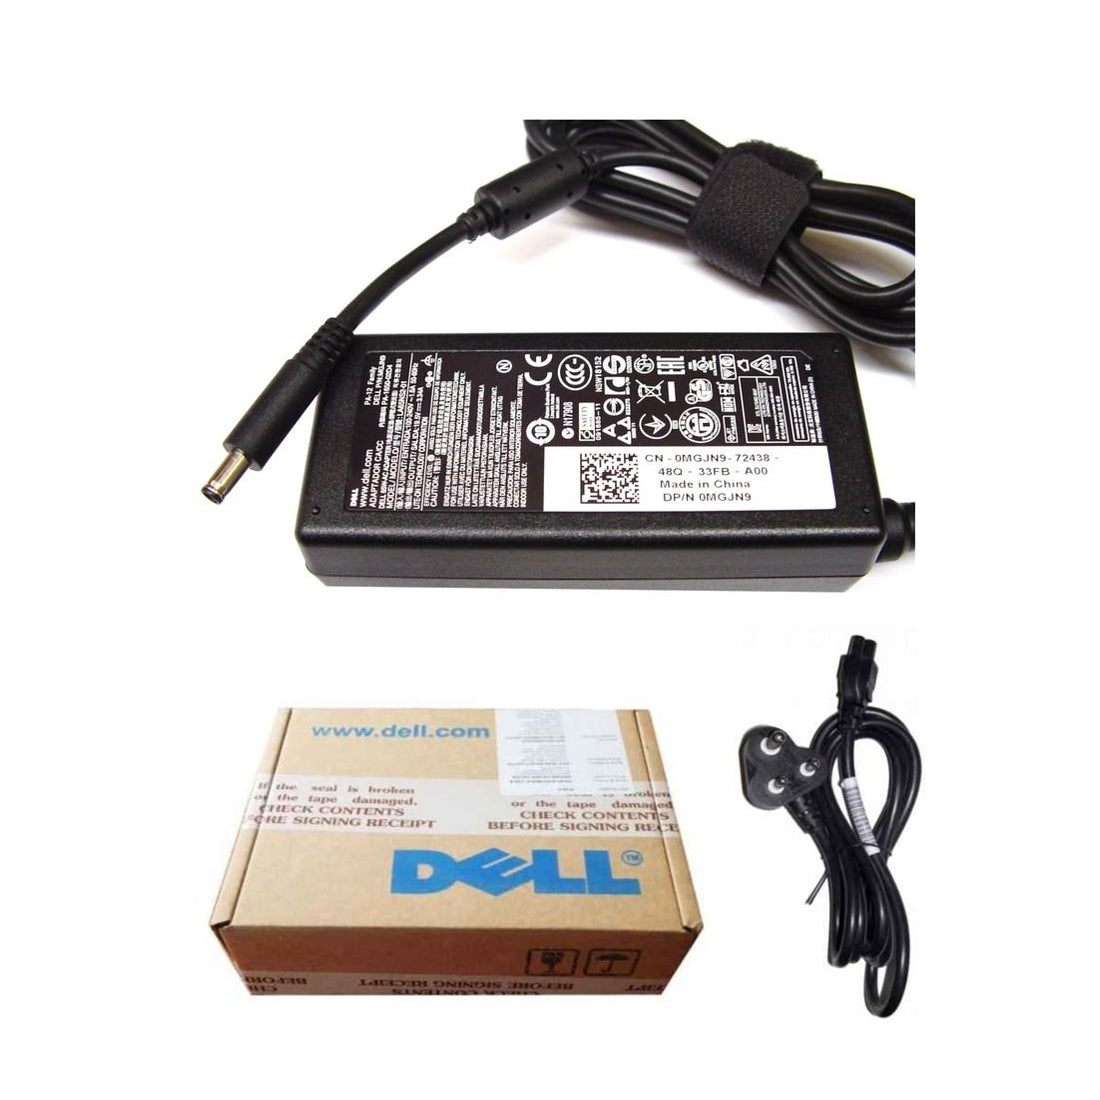 Dell Original 65W 19.5V 4.5mm Pin Laptop Charger Adapter for Inspiron 13 5378 With Power Cord